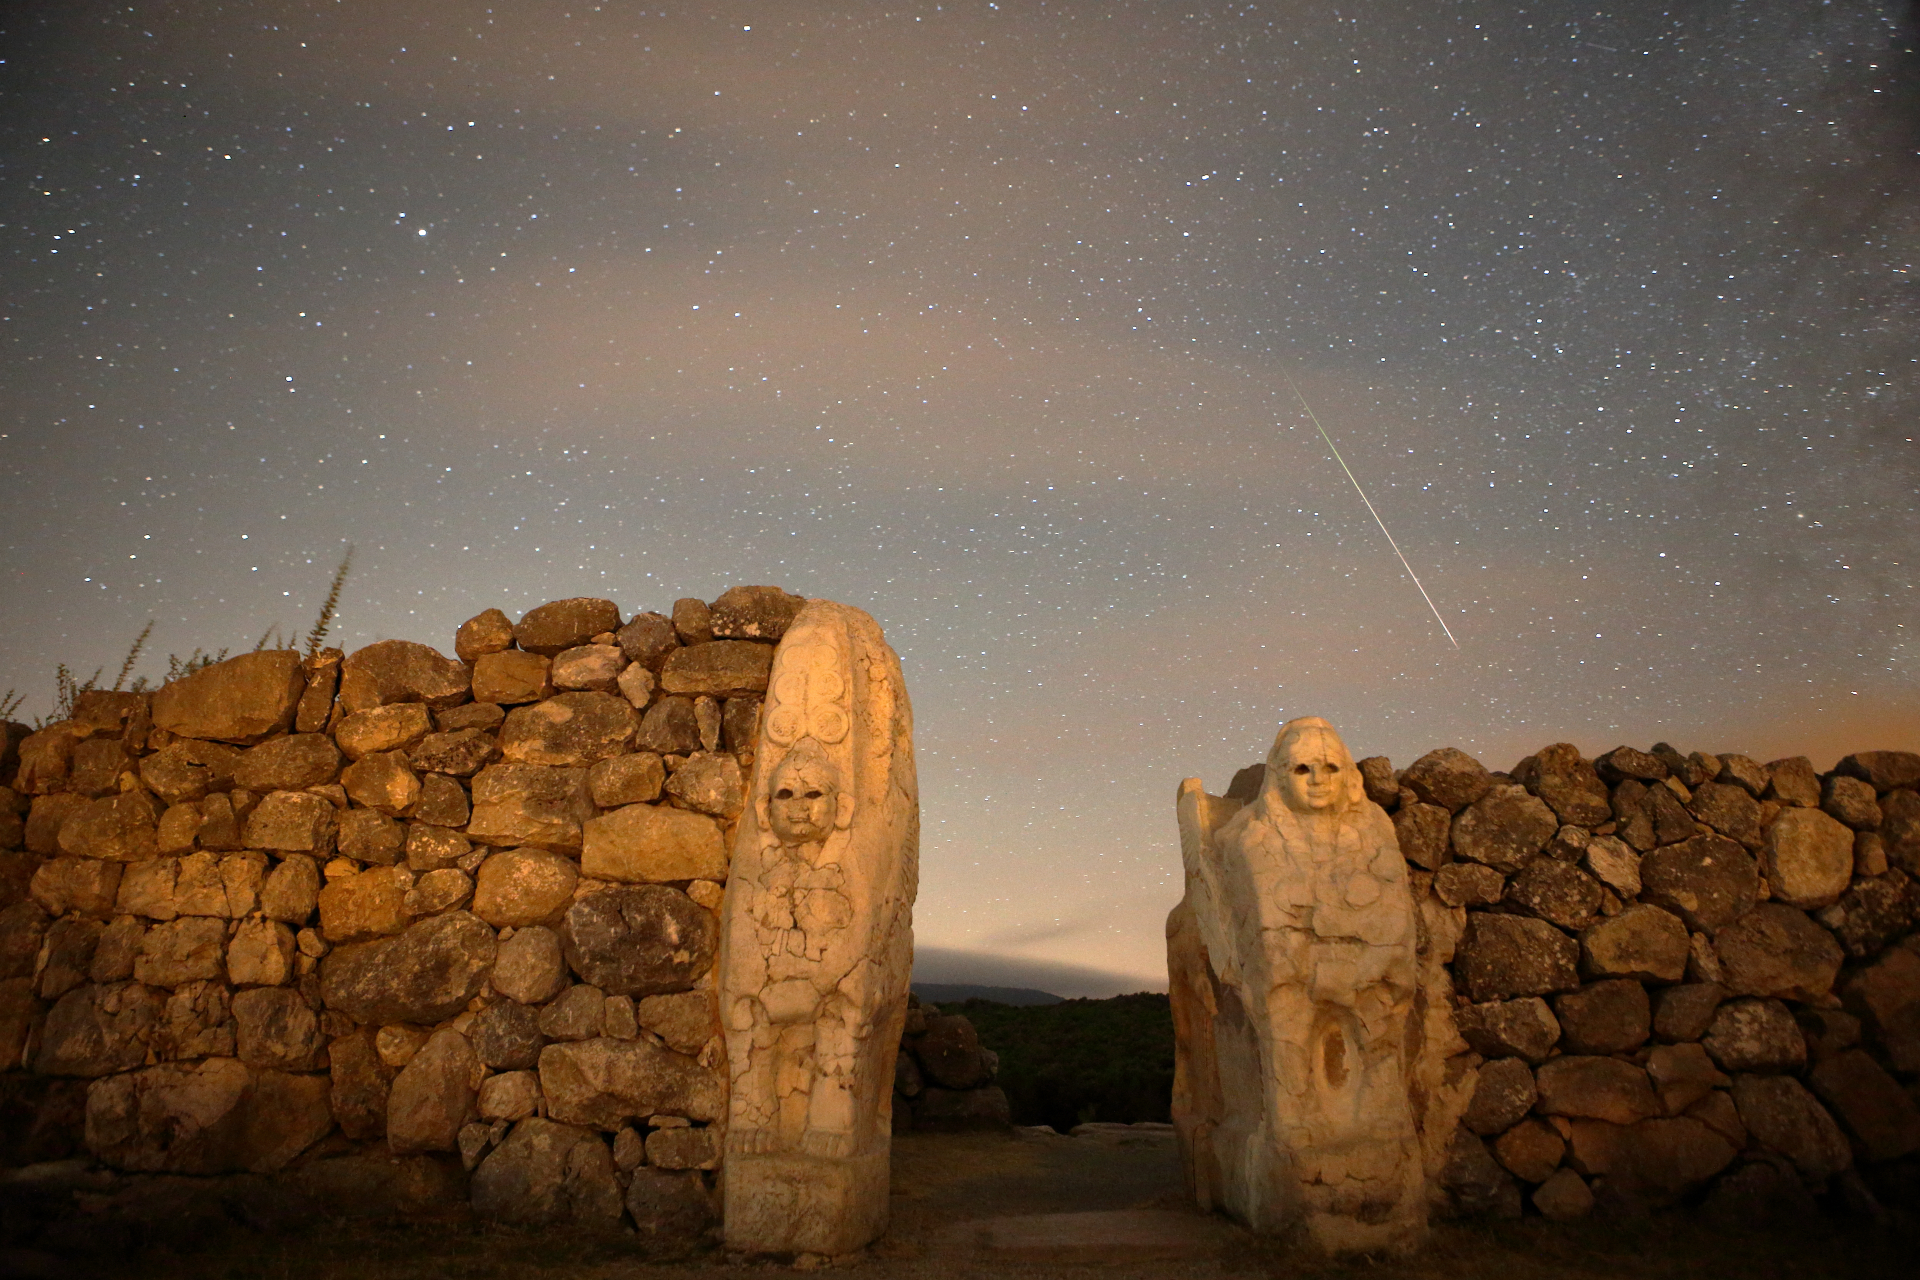 The Perseid meteor streaks across the sky above a stone wall with two figures carved into the rock.